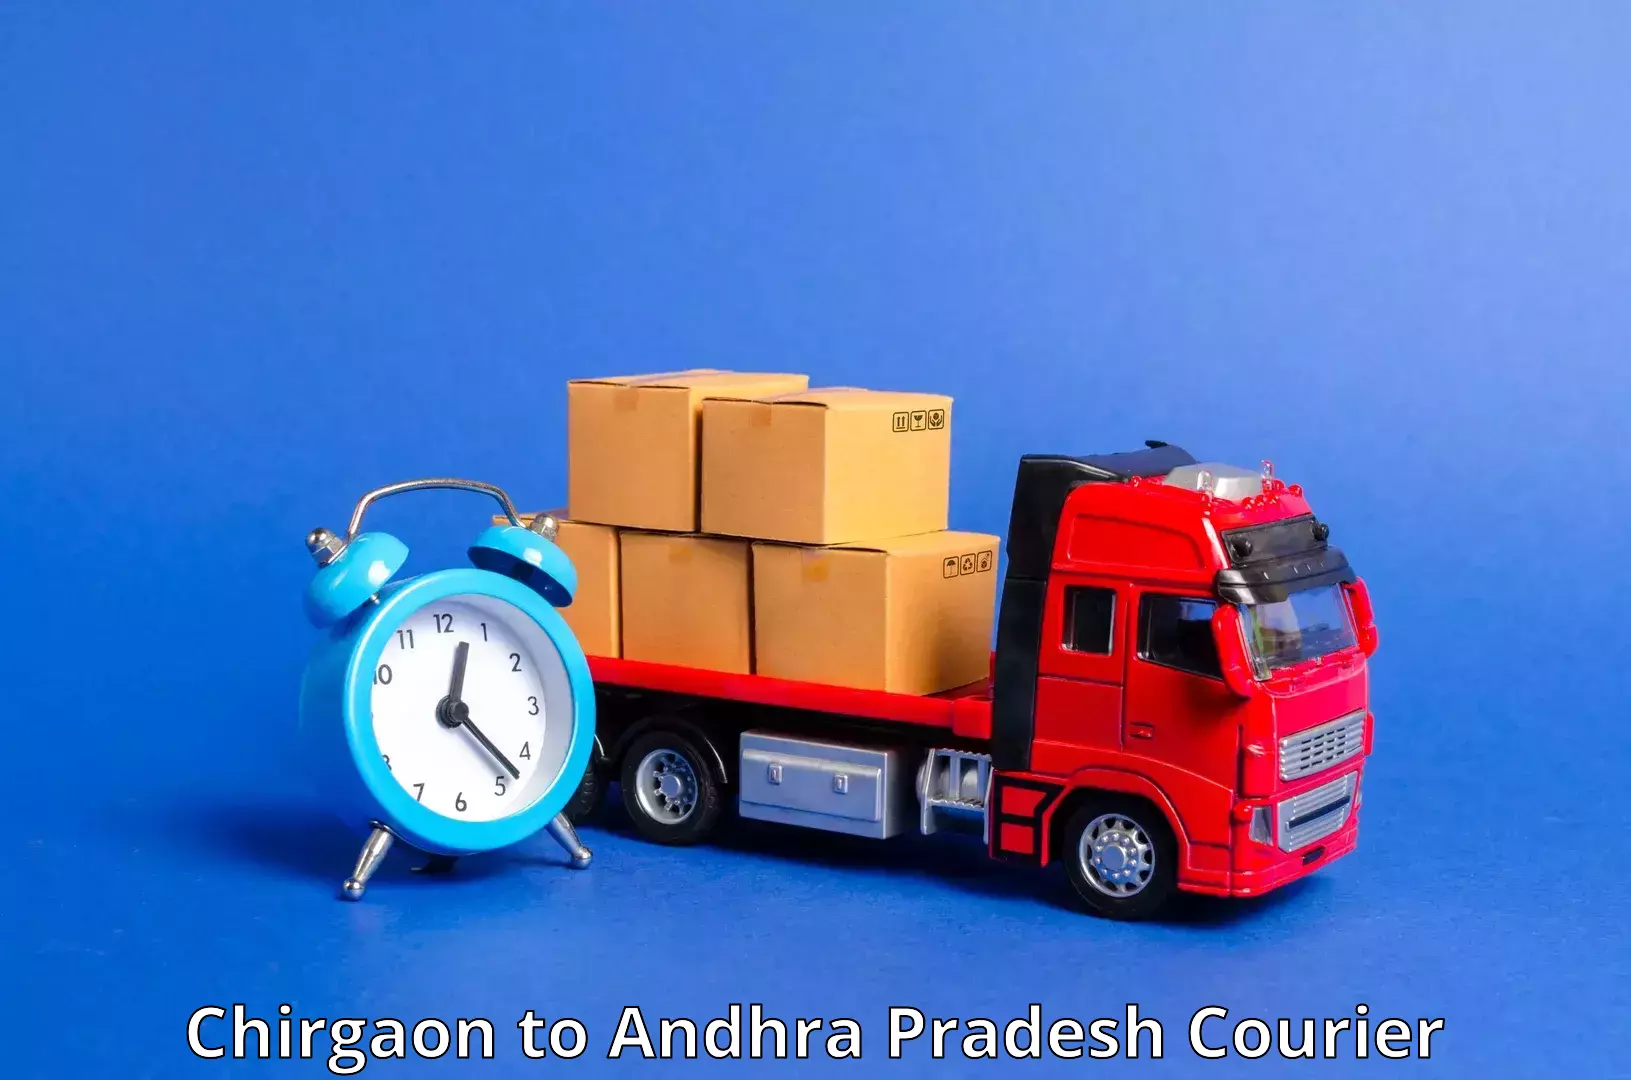 Reliable courier service Chirgaon to Visakhapatnam Port